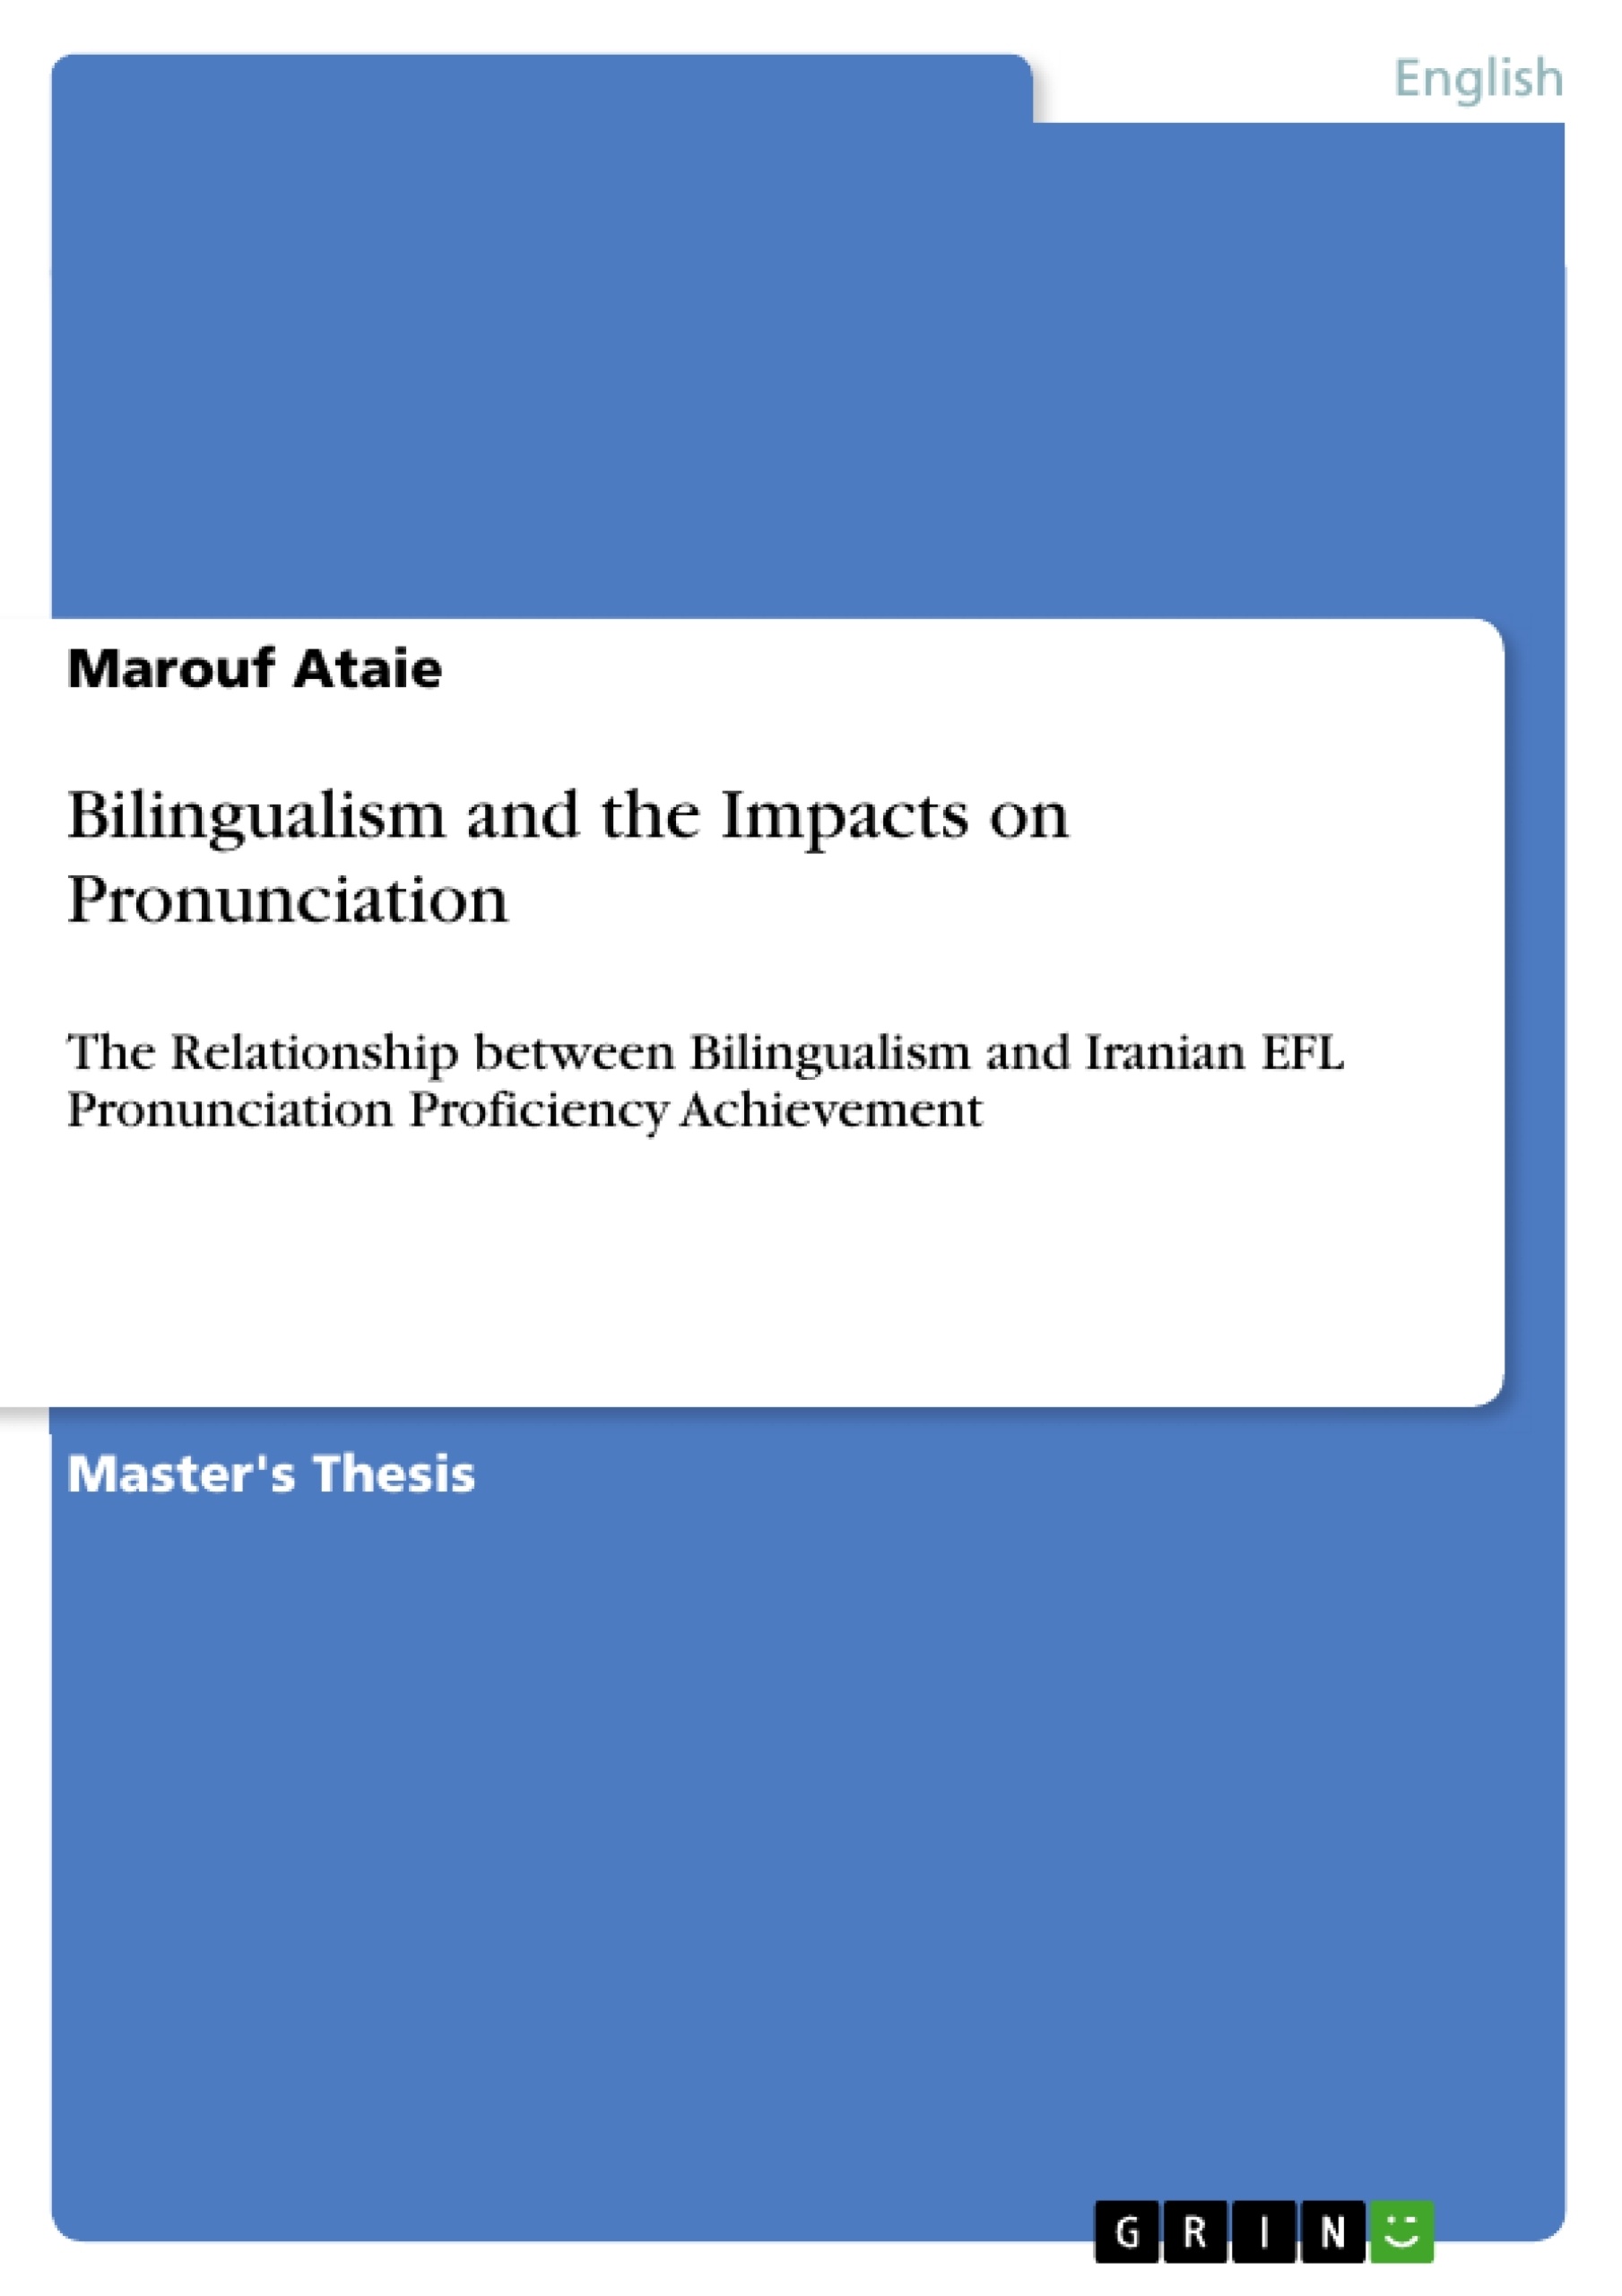 Title: Bilingualism and the Impacts on Pronunciation